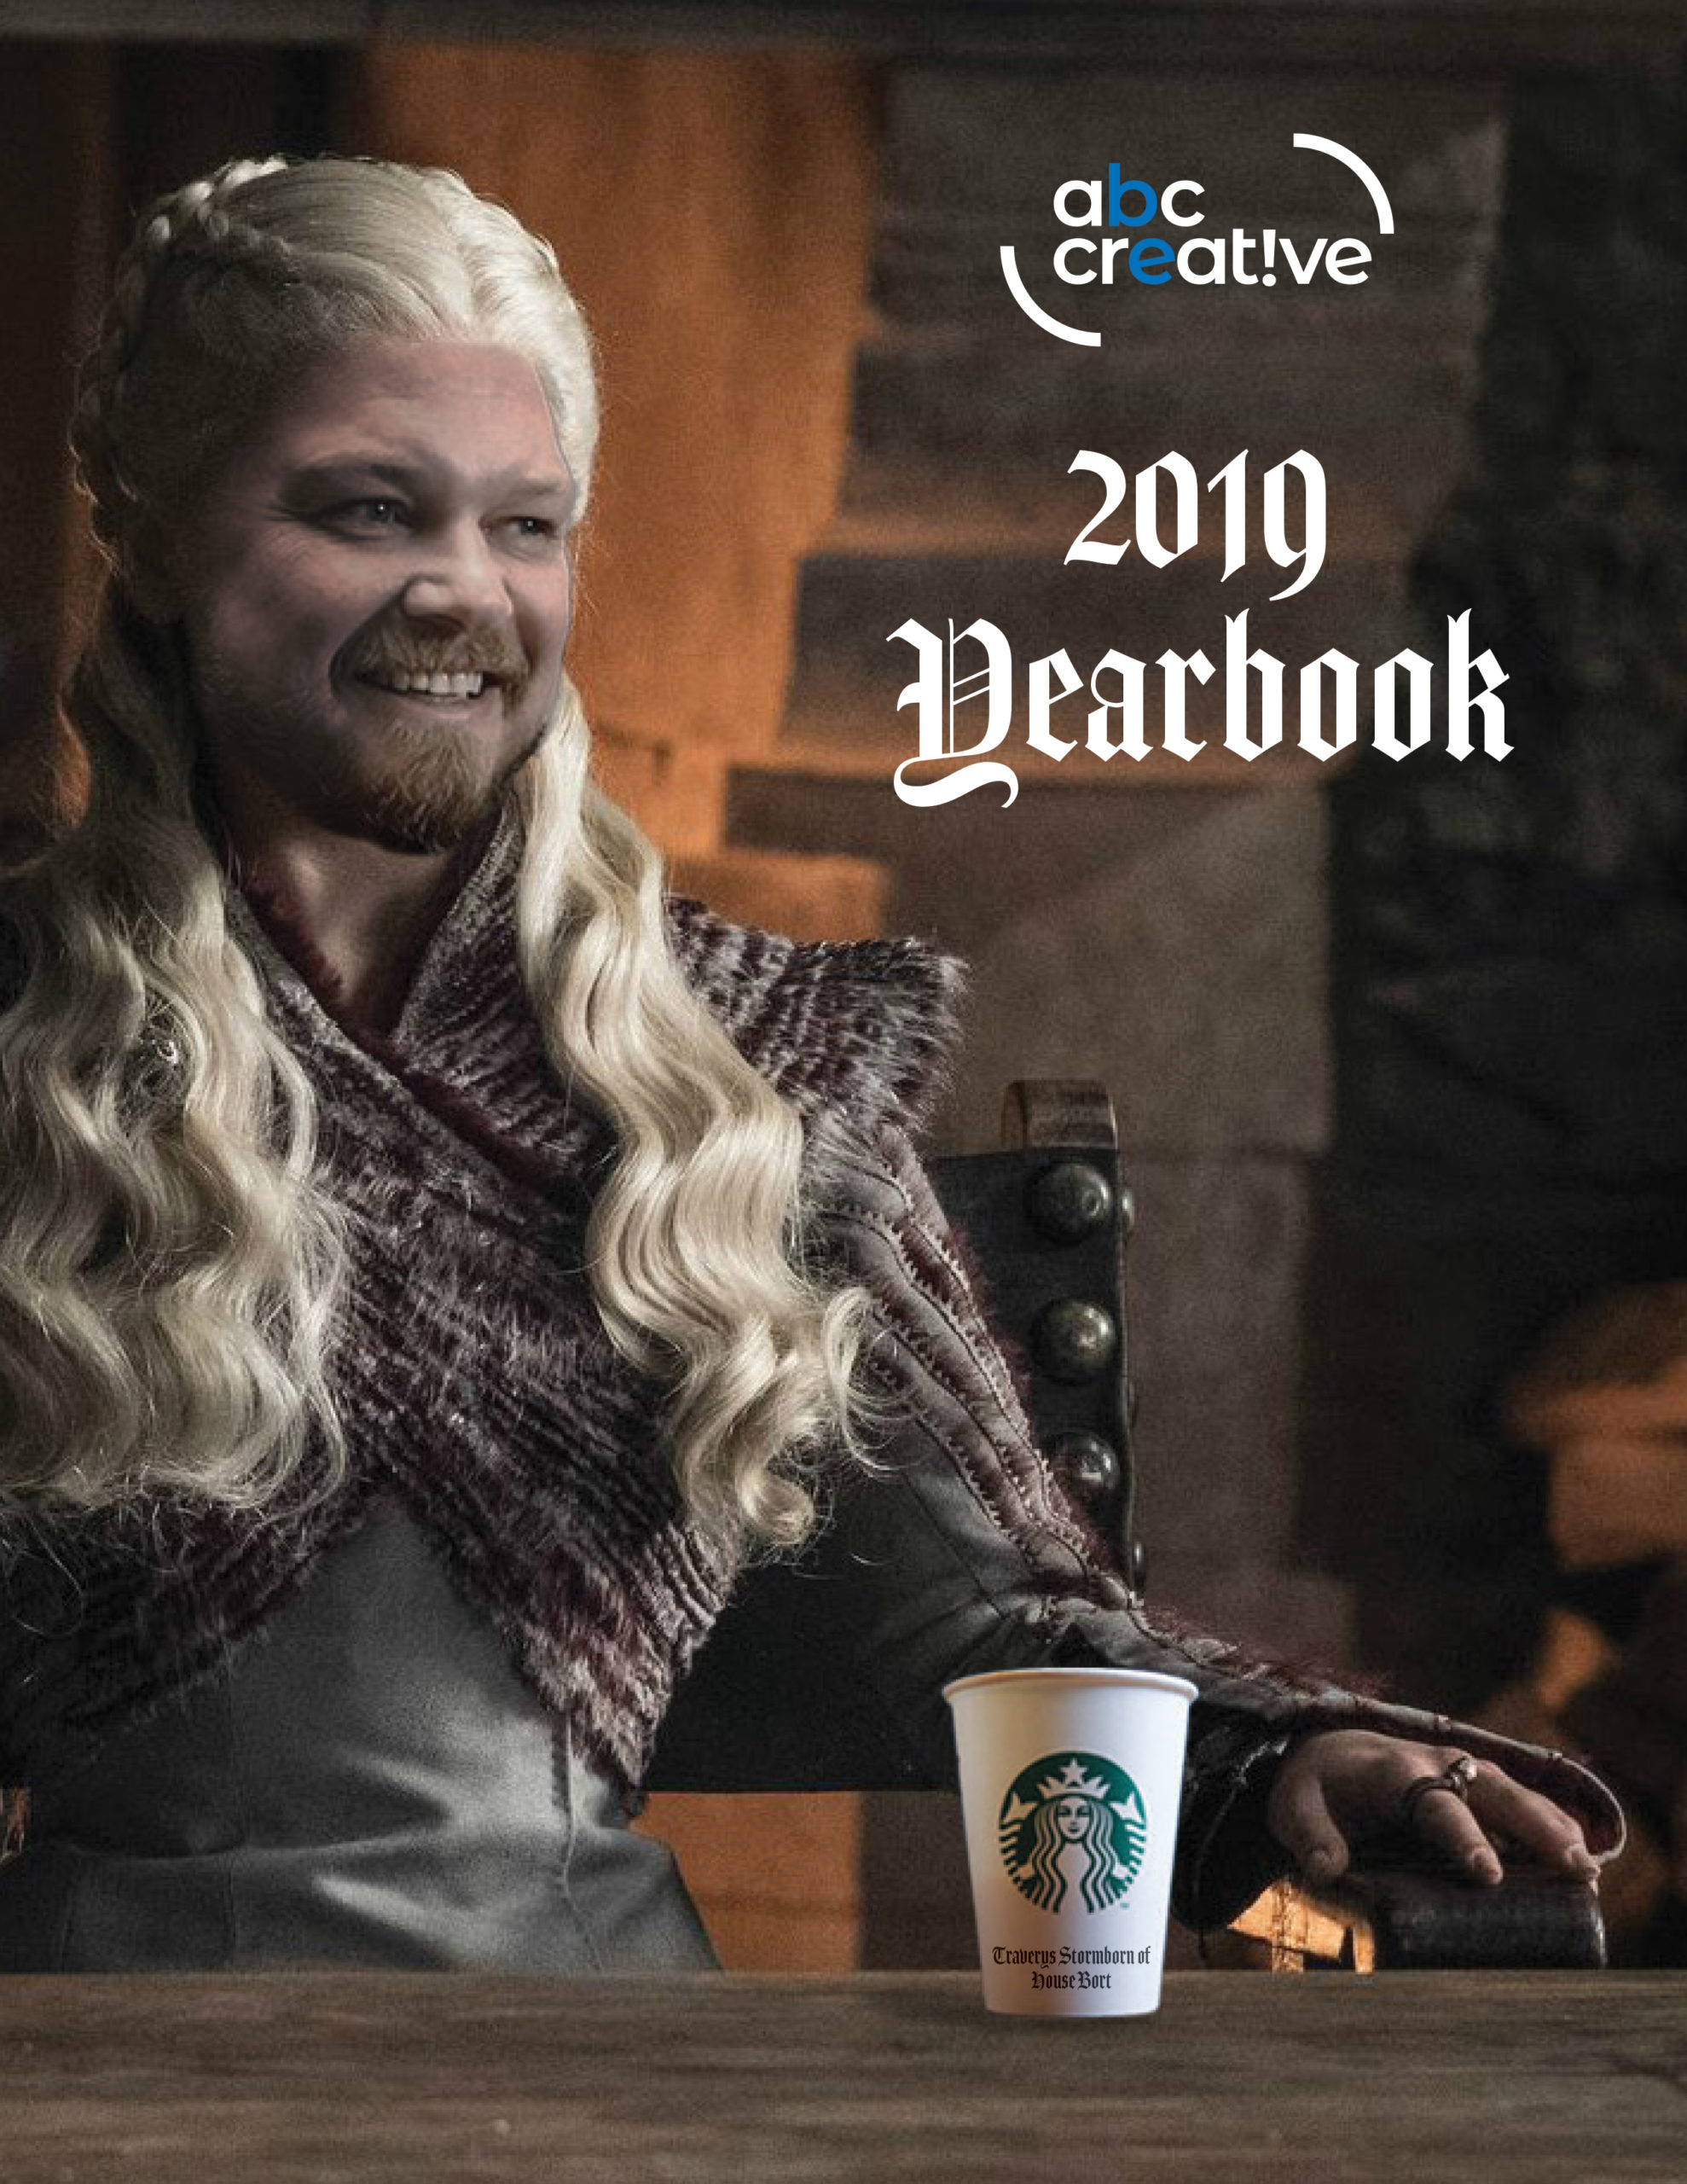 2019 Yearbook